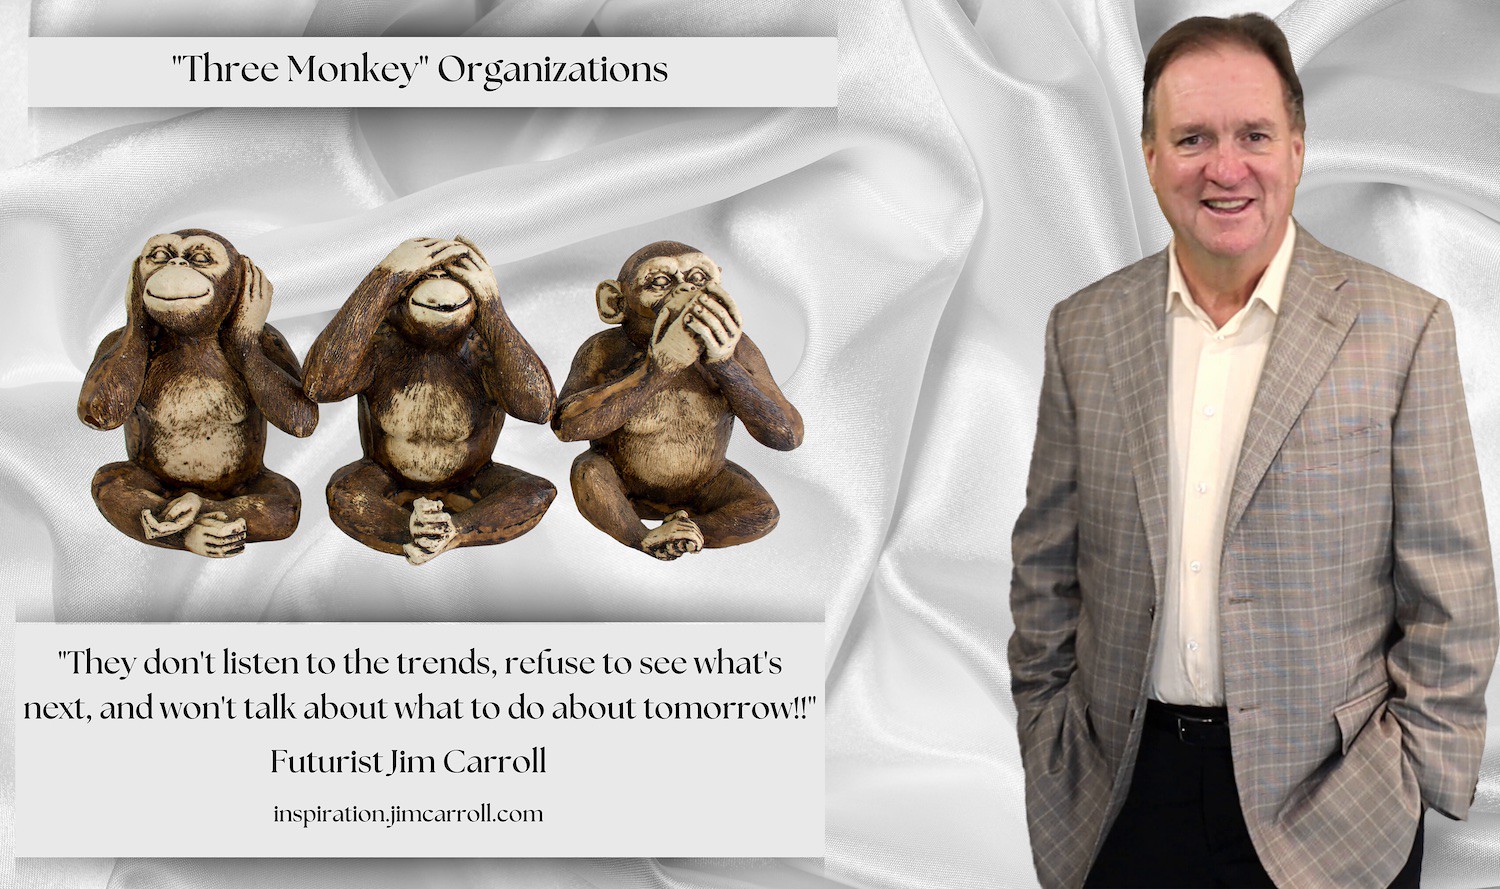 "'Three Monkey Organizations' - They don't listen to the trends, refuse to see what's next, and won't talk about what to do about tomorrow!!" - Futurist Jim Carroll